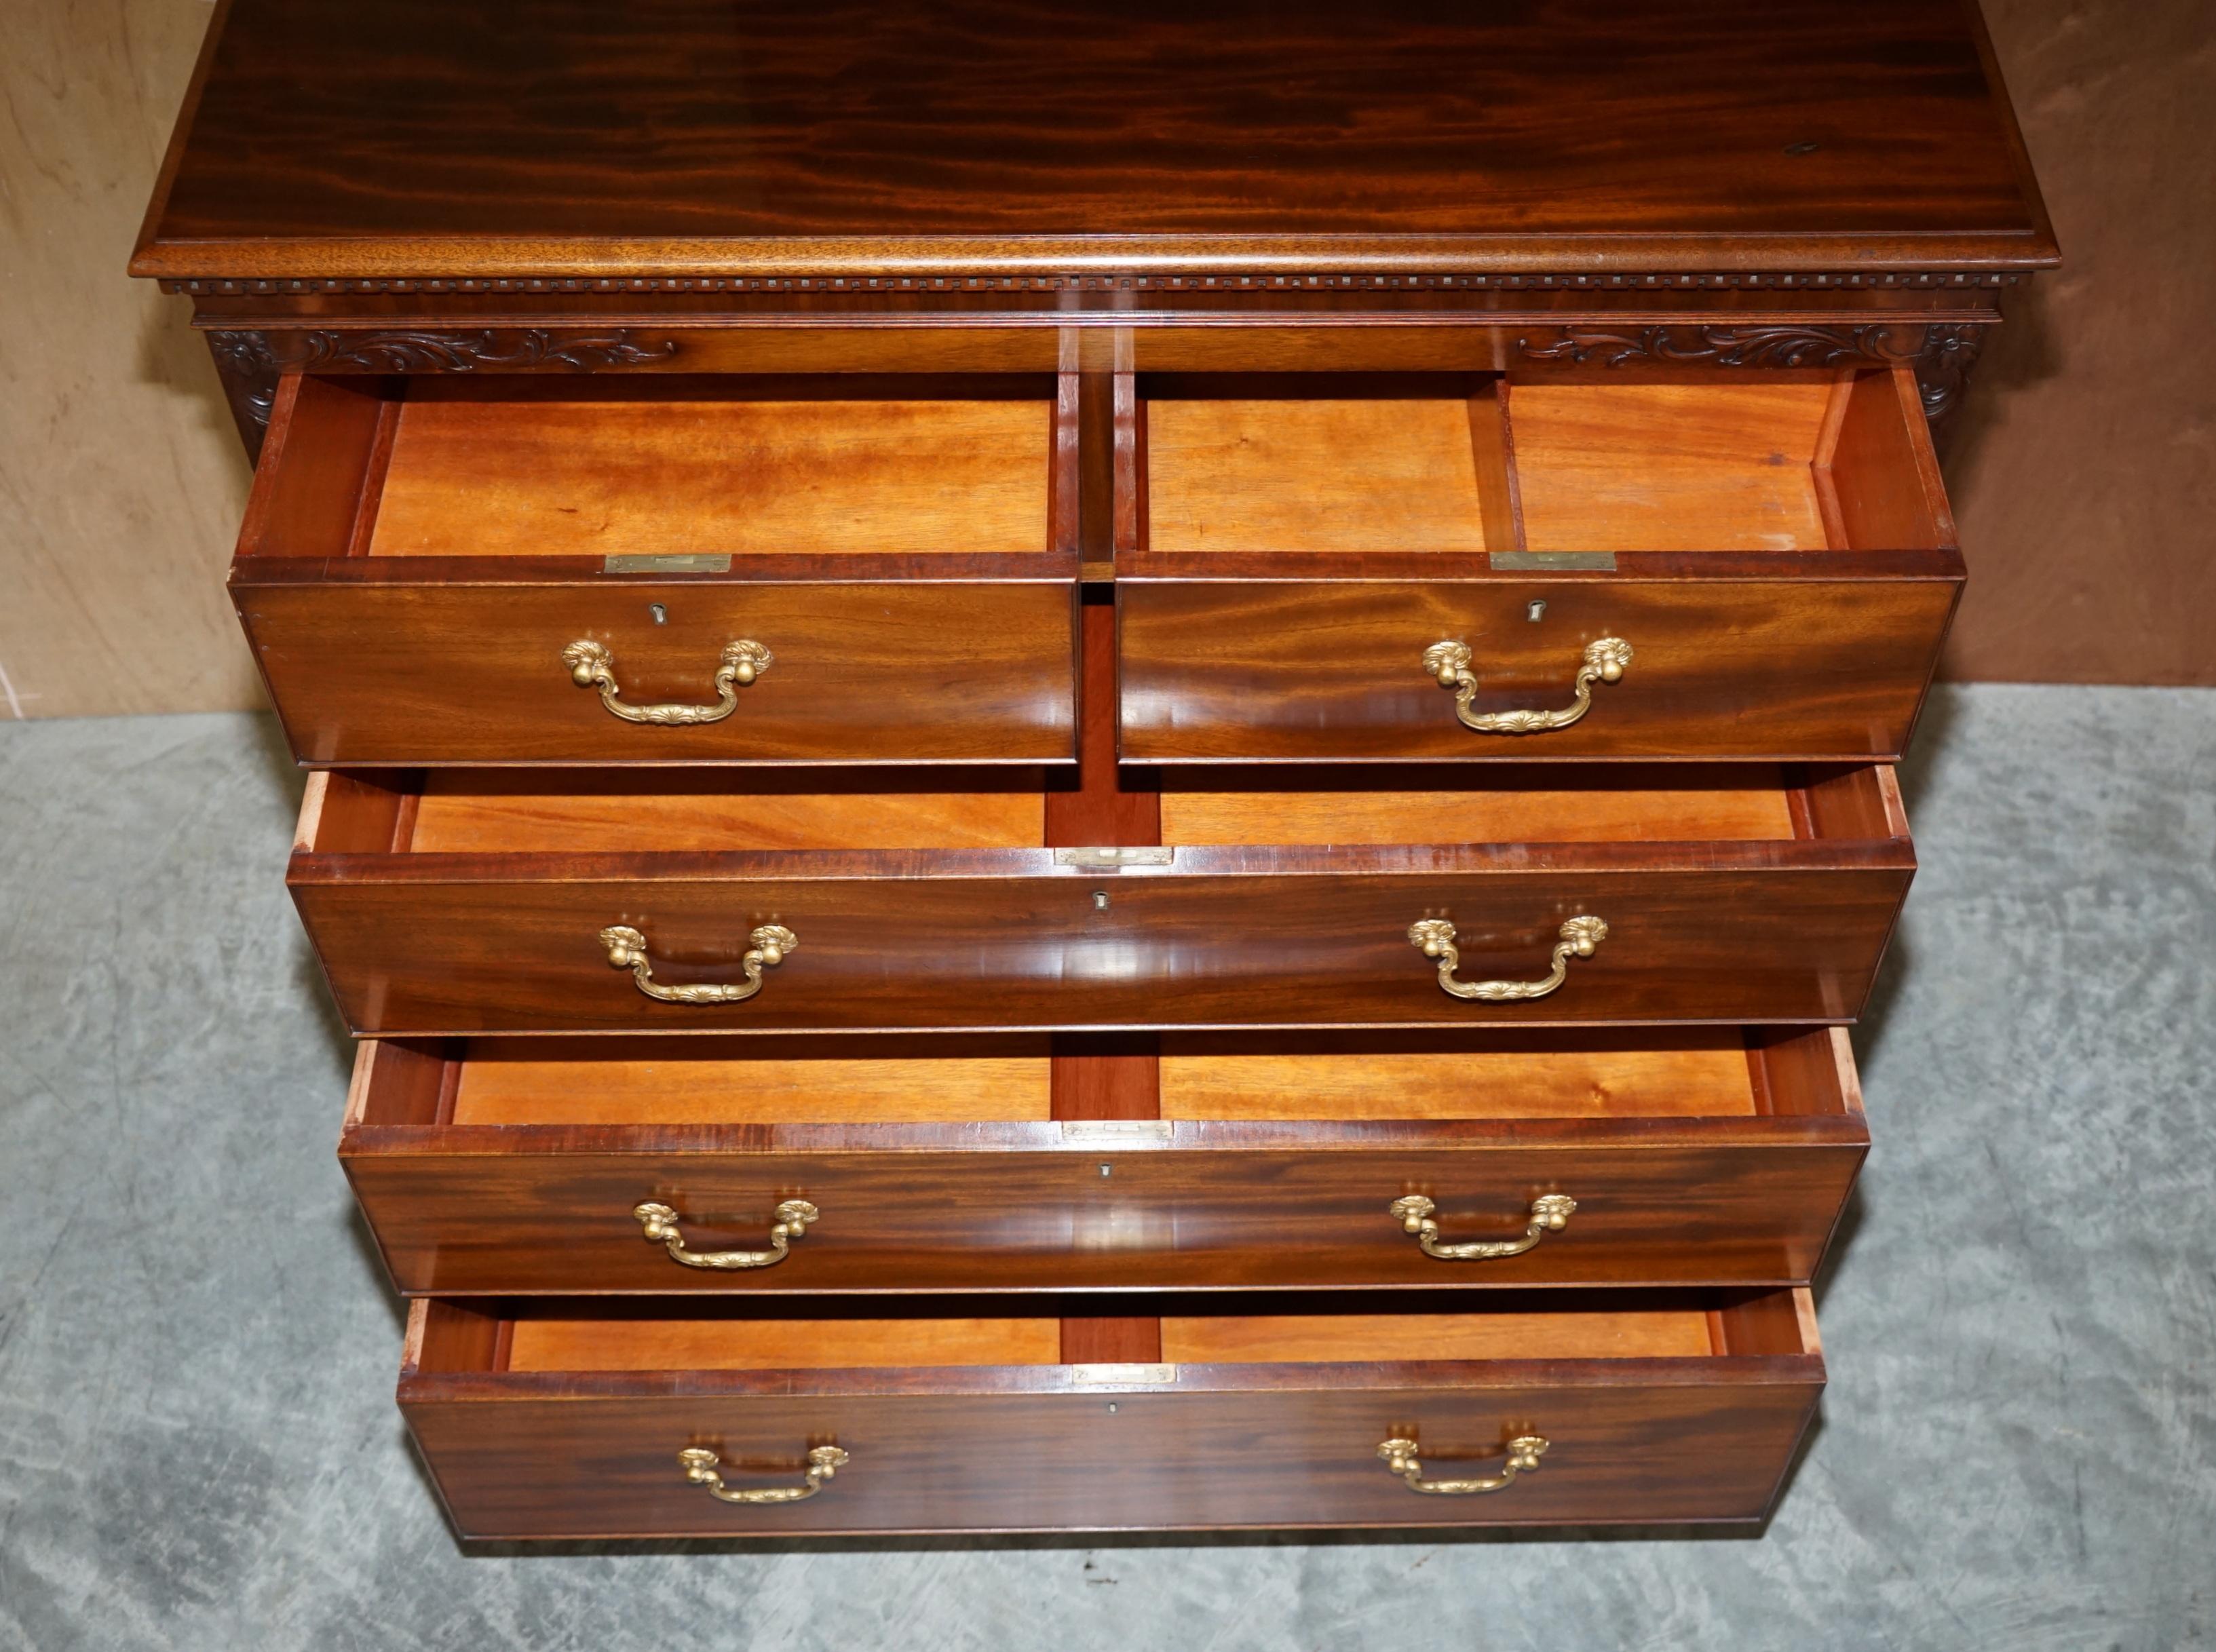 Exquisite Quality circa 1900 Honduras Hardwood Chest of Drawers Part of a Suite 10